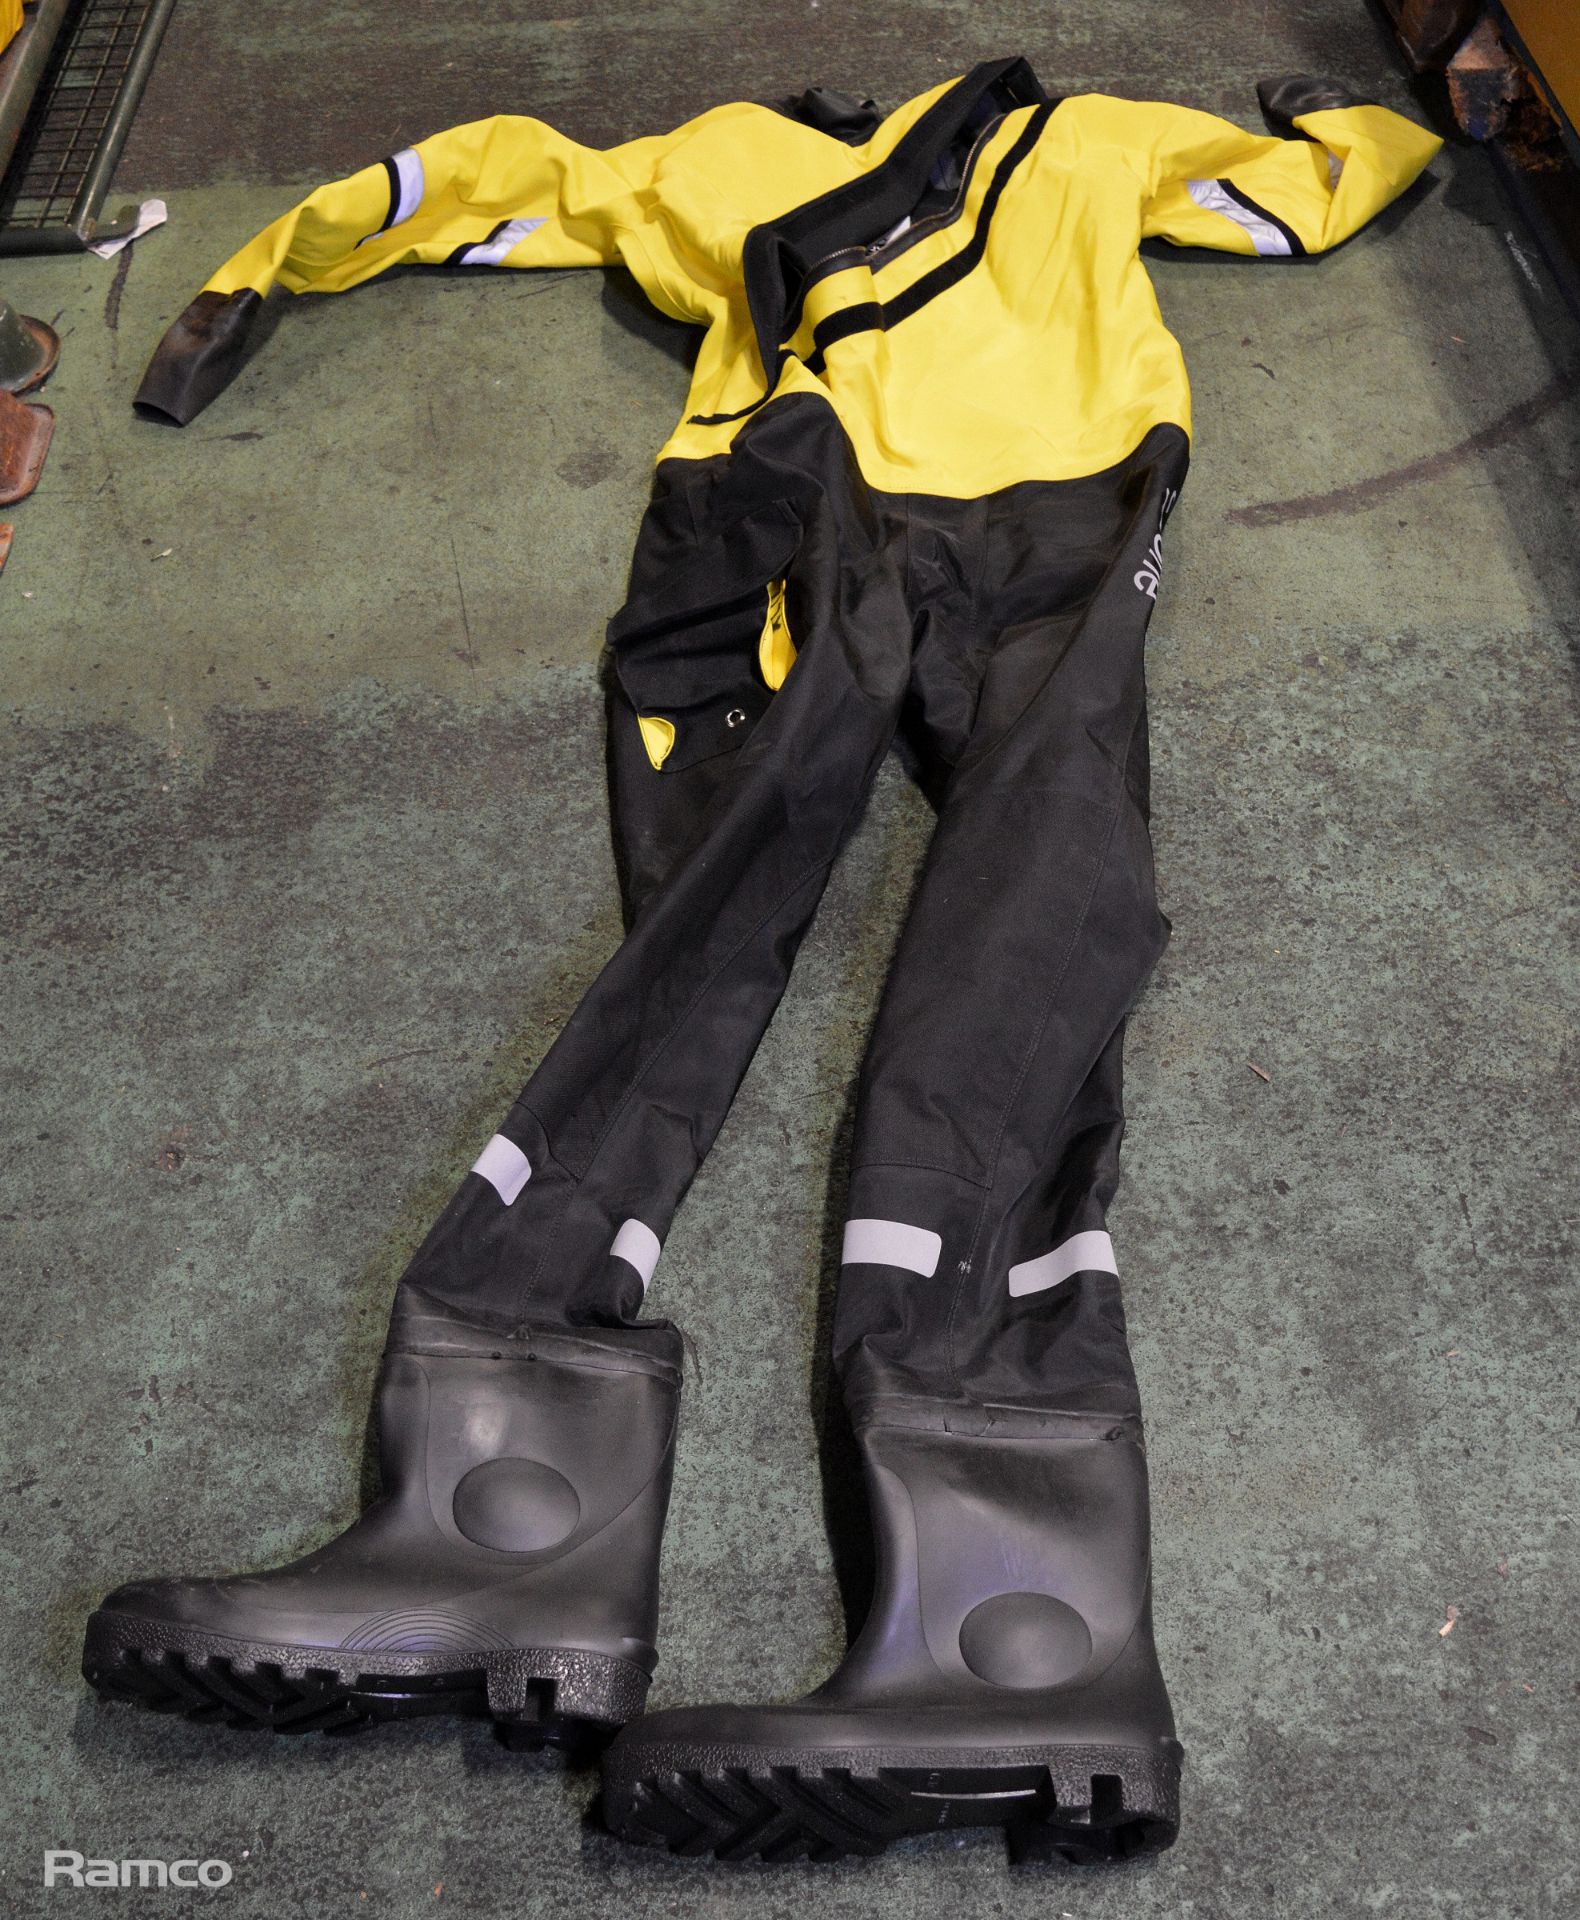 5x Fire Rescue Dry Suit - X Large - Image 2 of 3